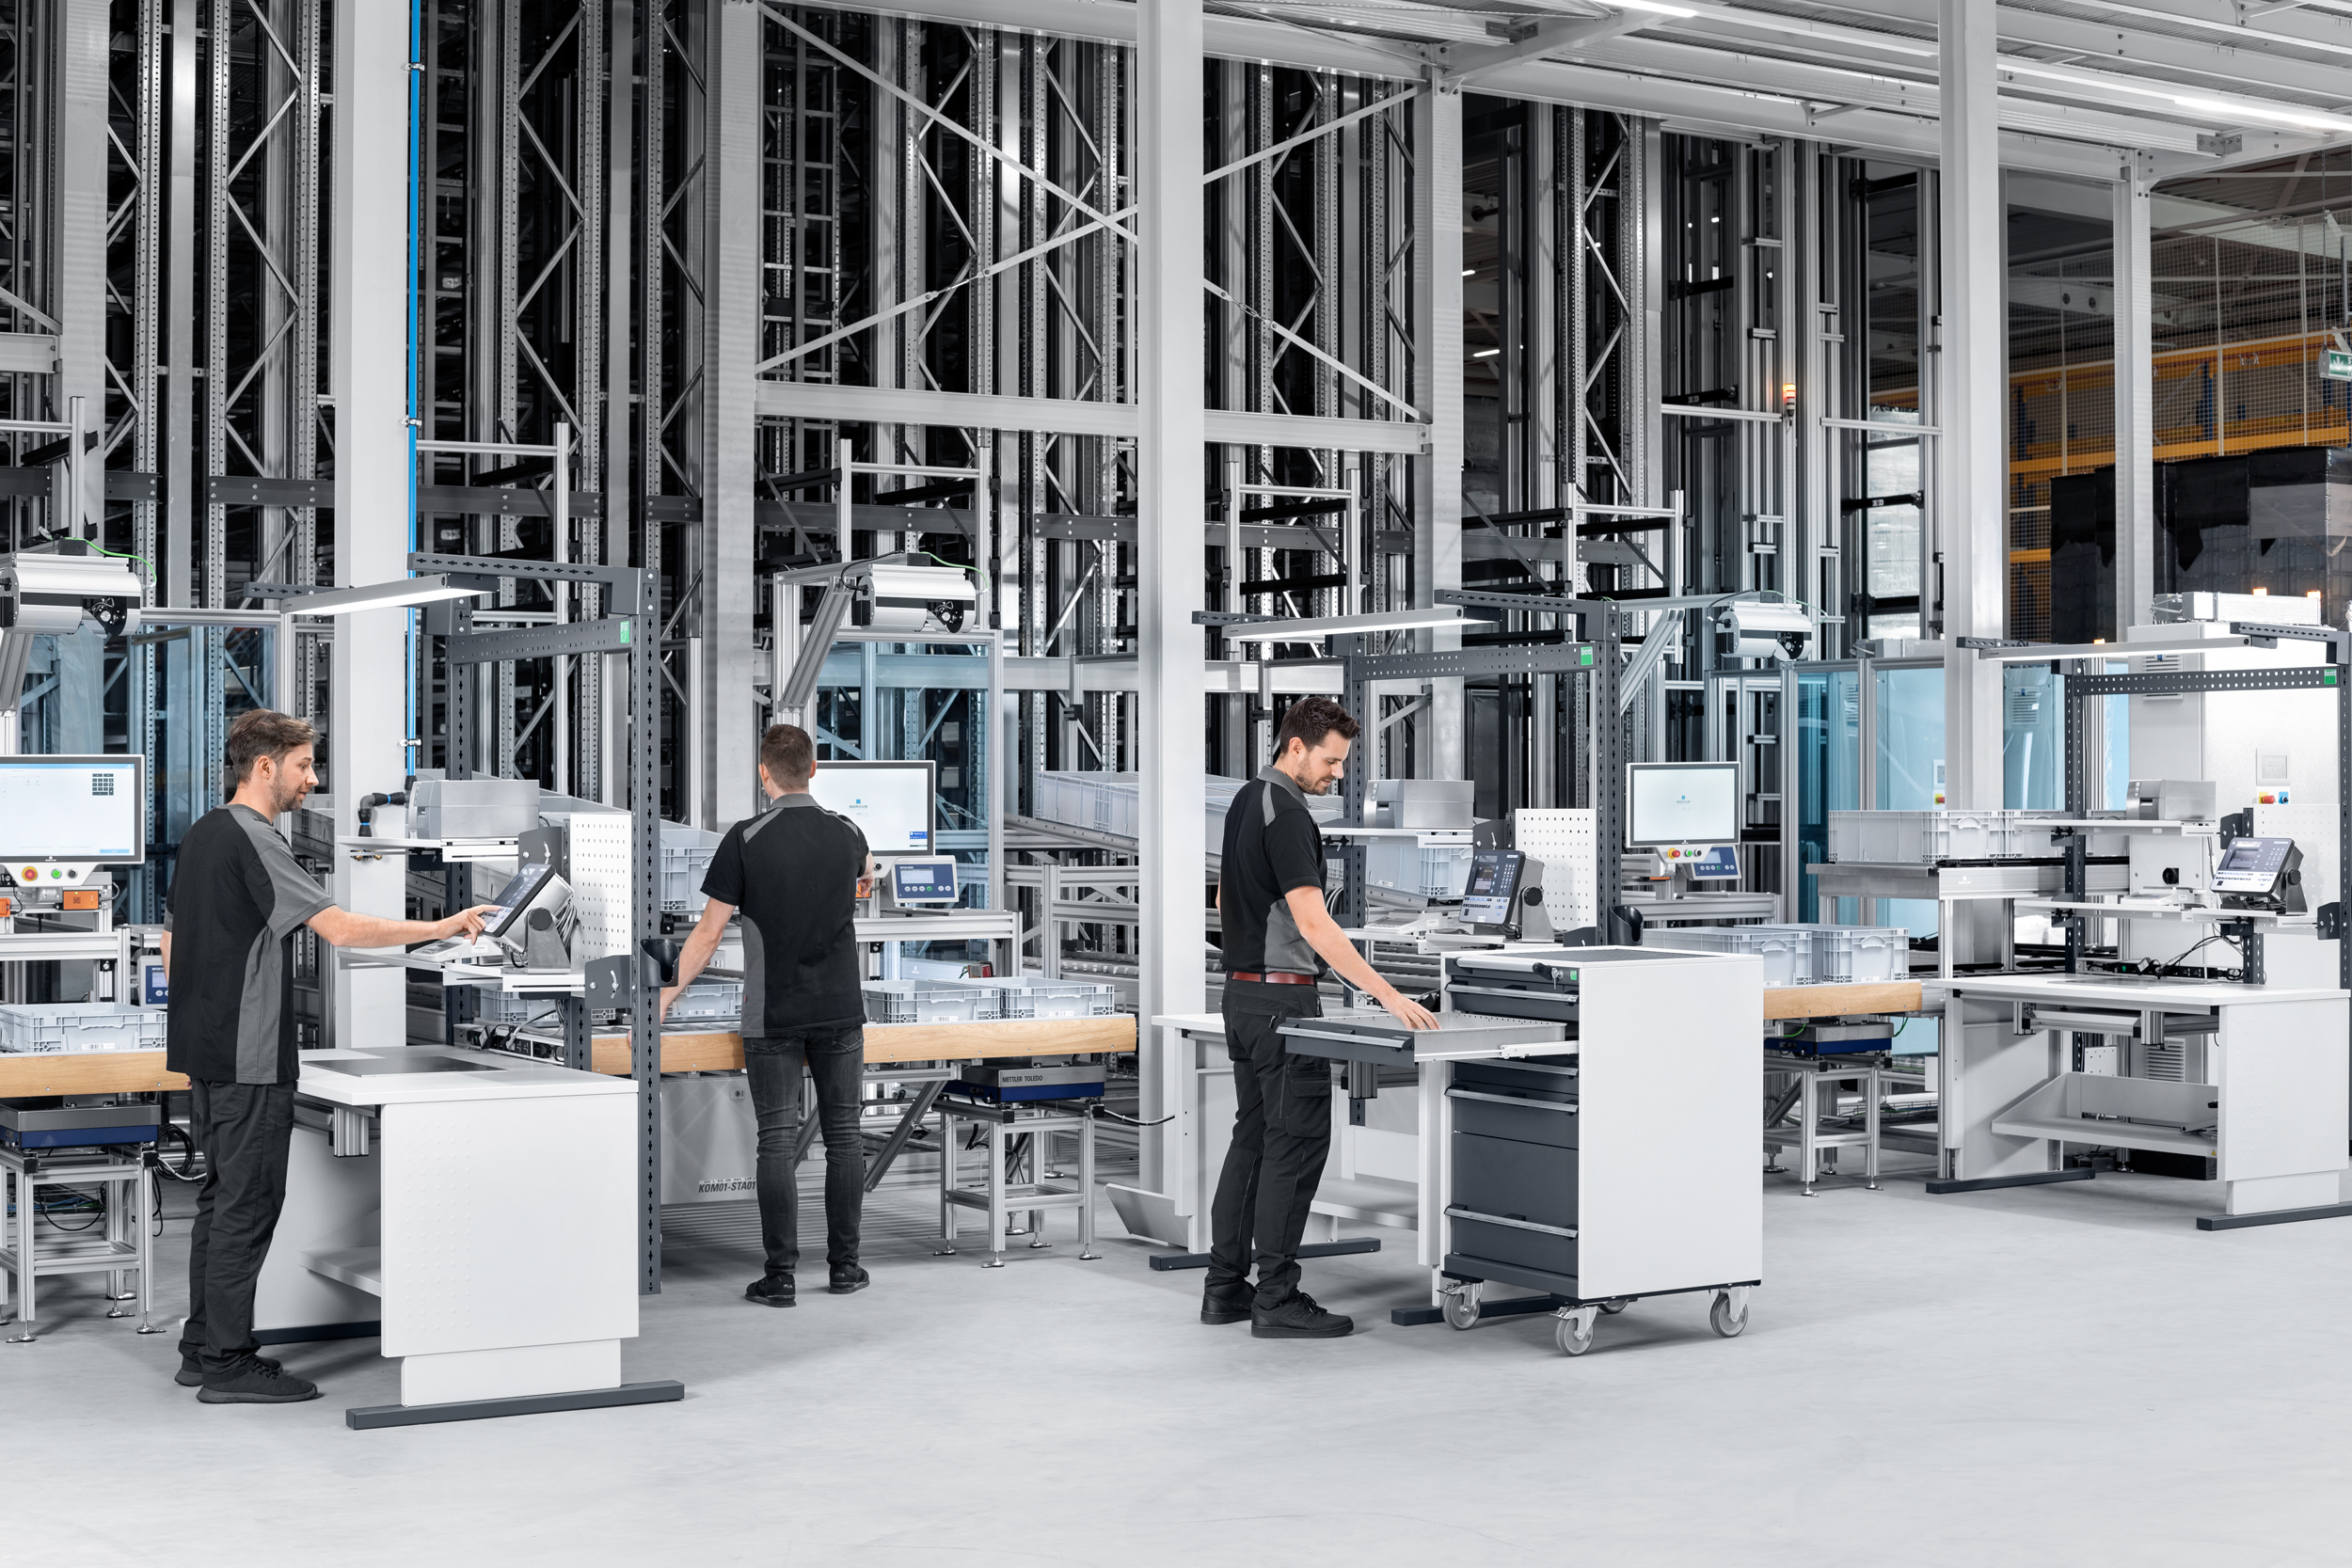 avero workstation systems: Optimal ergonomic workplace design for production